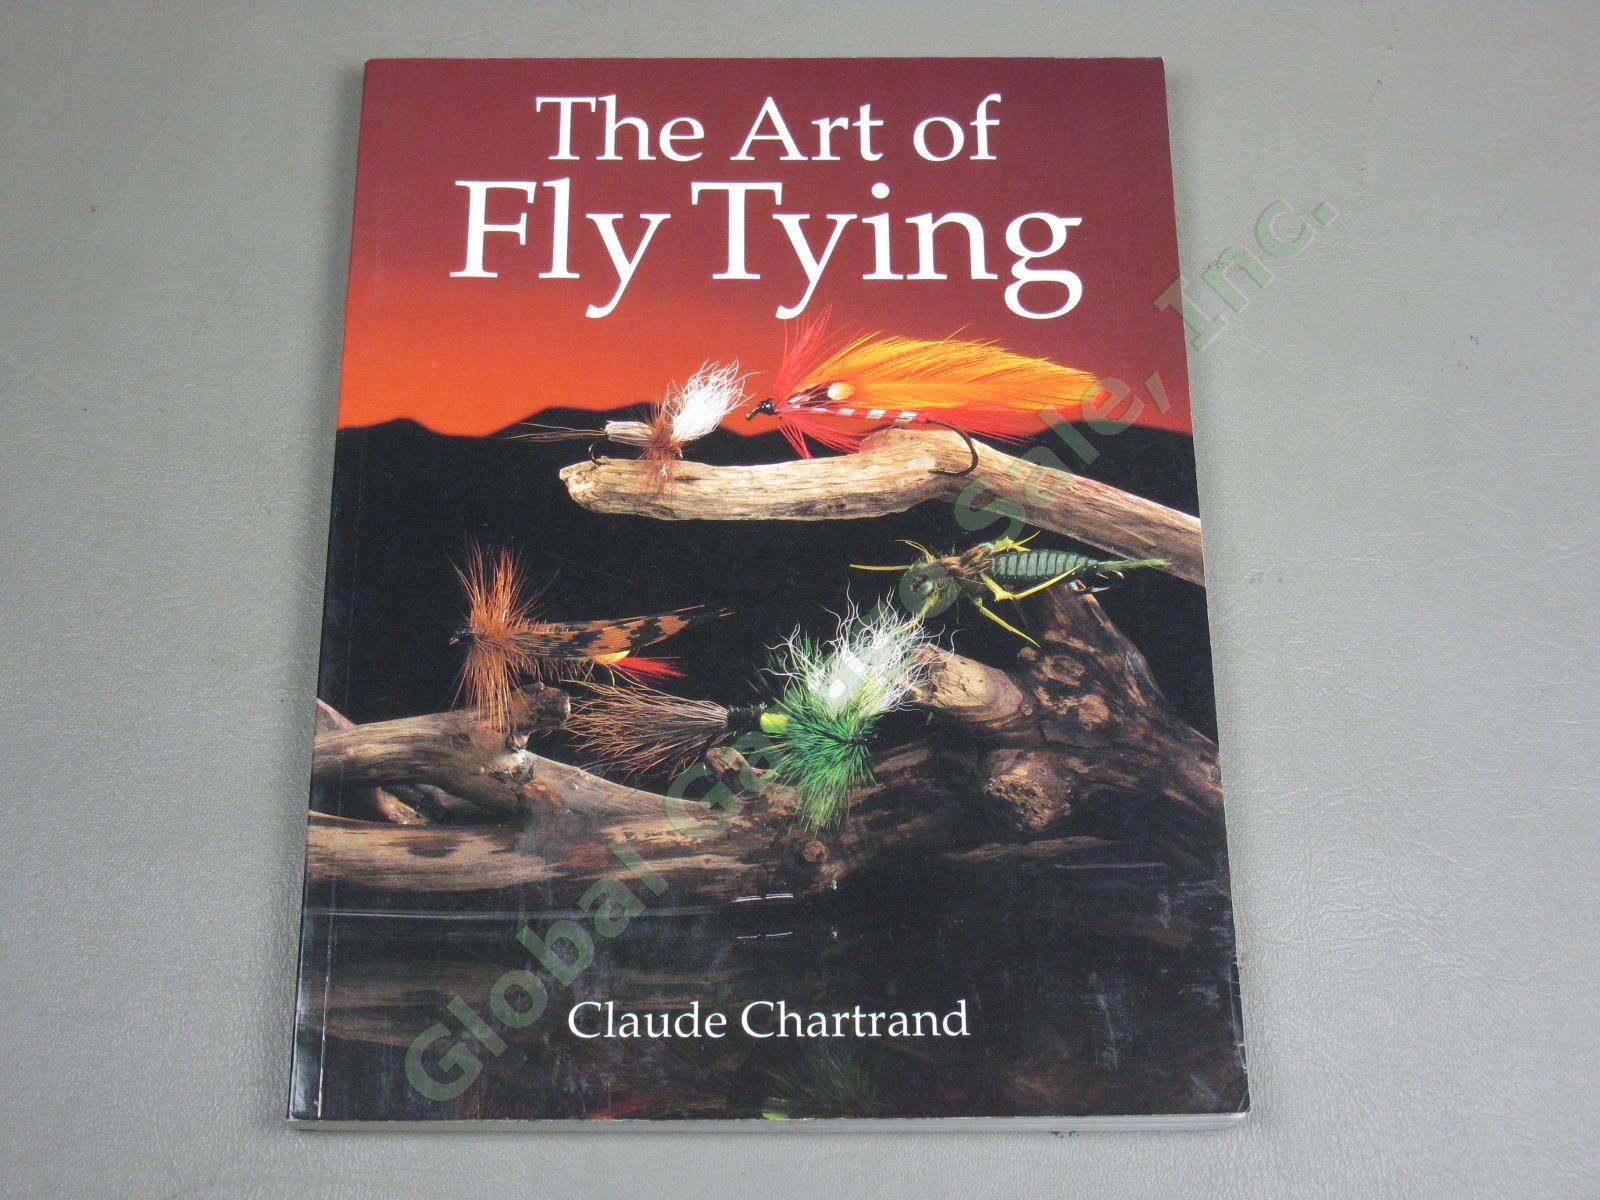 19 Fly Tying Manuals Fishing Books Lot Trout Flies Nymphs Tricos Emergers HC+ NR 13